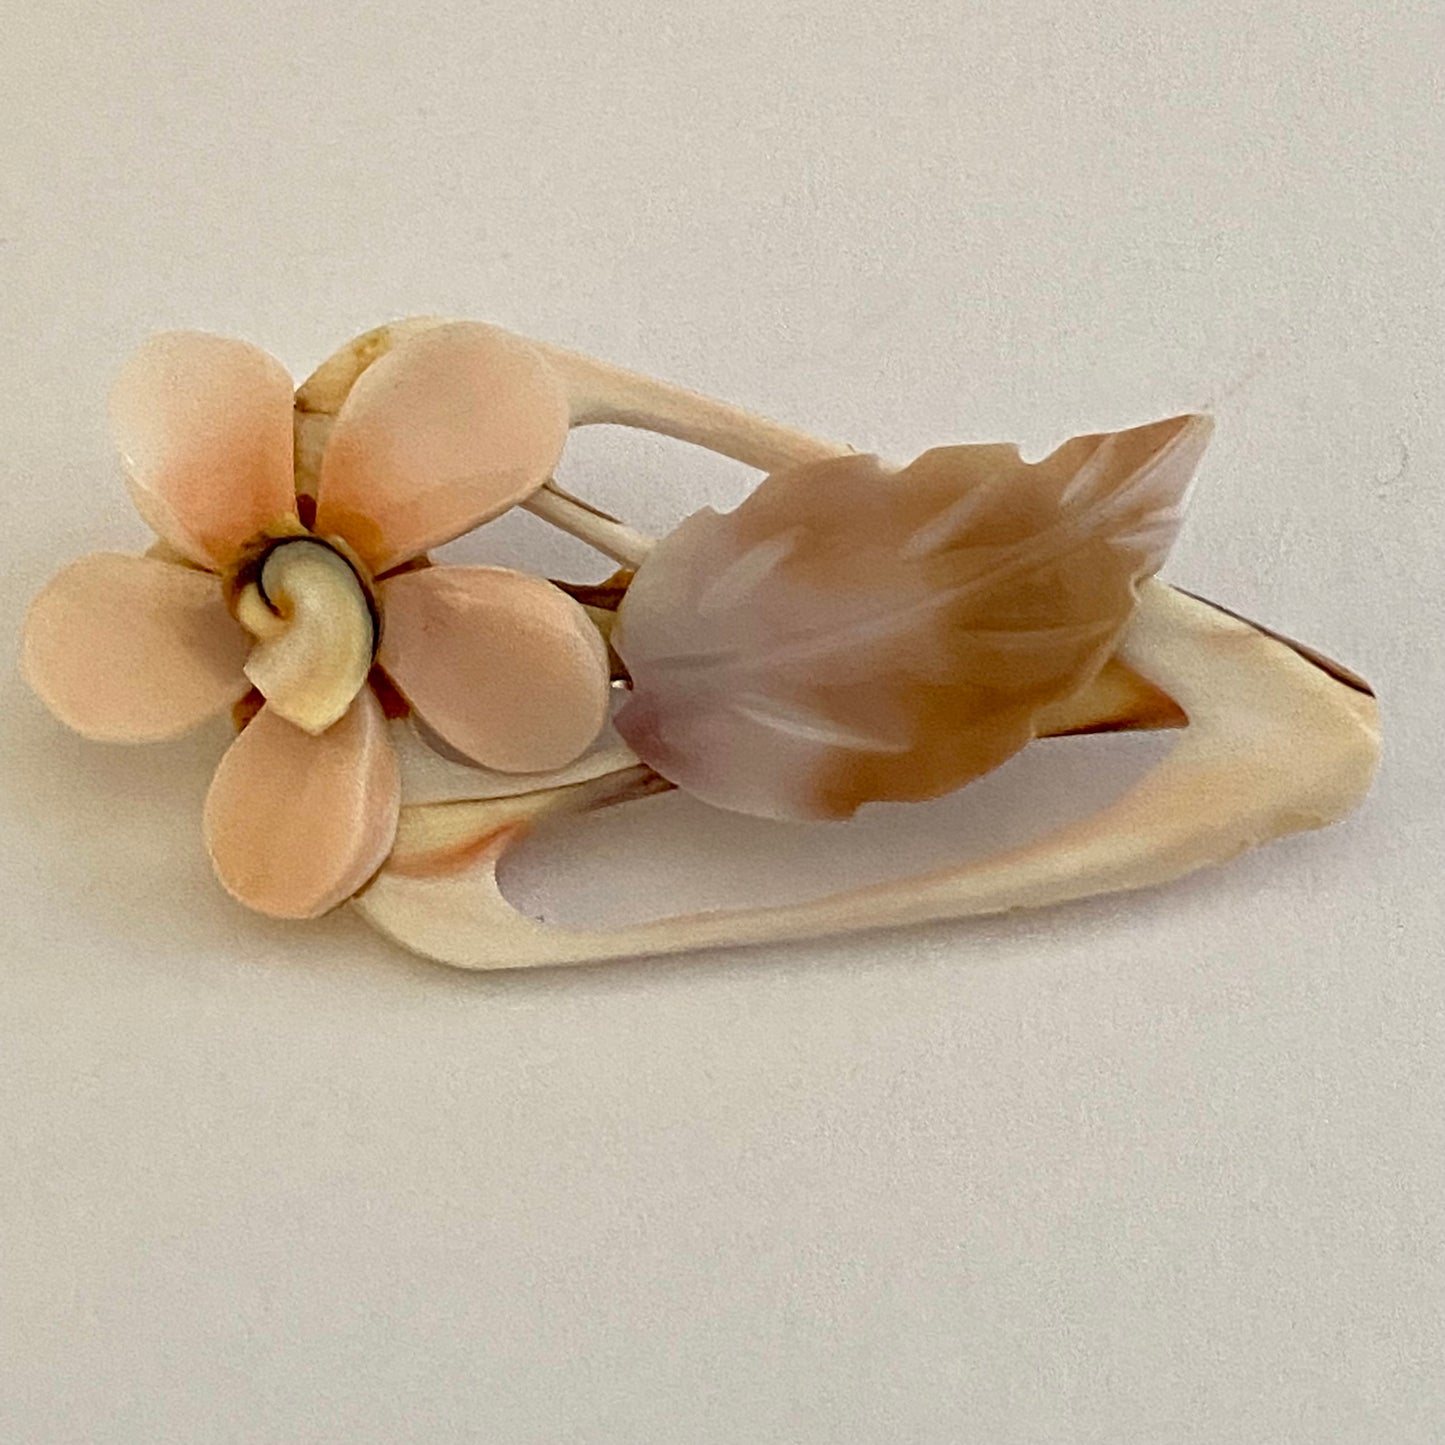 Late 60s/ Early 70s Made In Taiwan Seashell Brooch